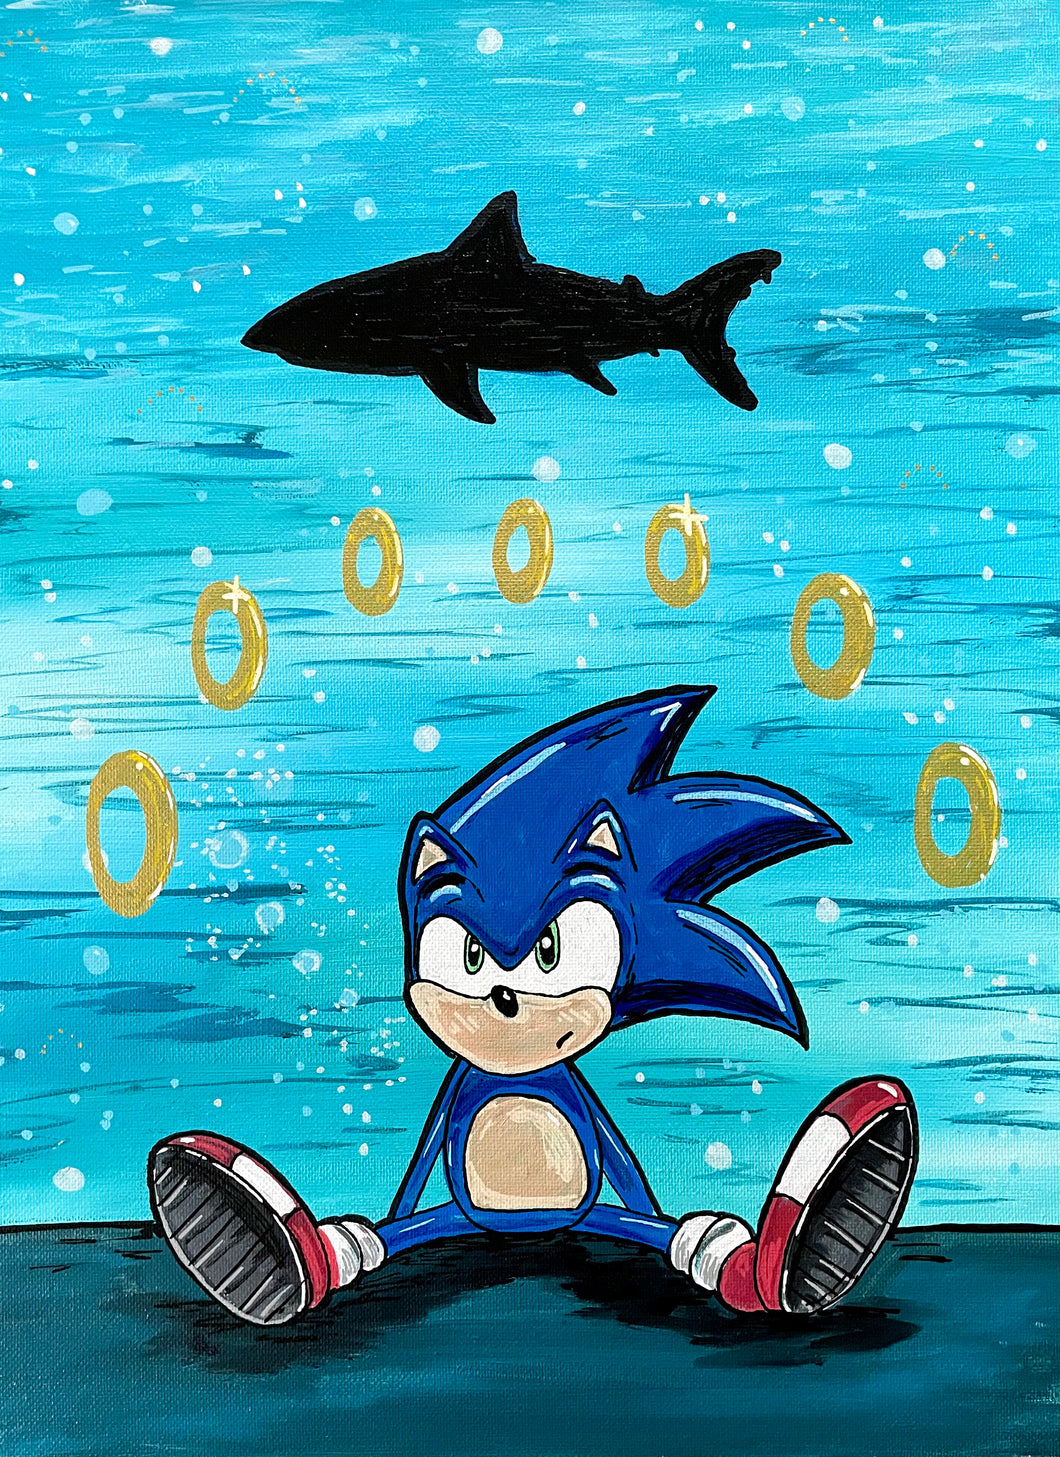 Watch out Sonic! Print